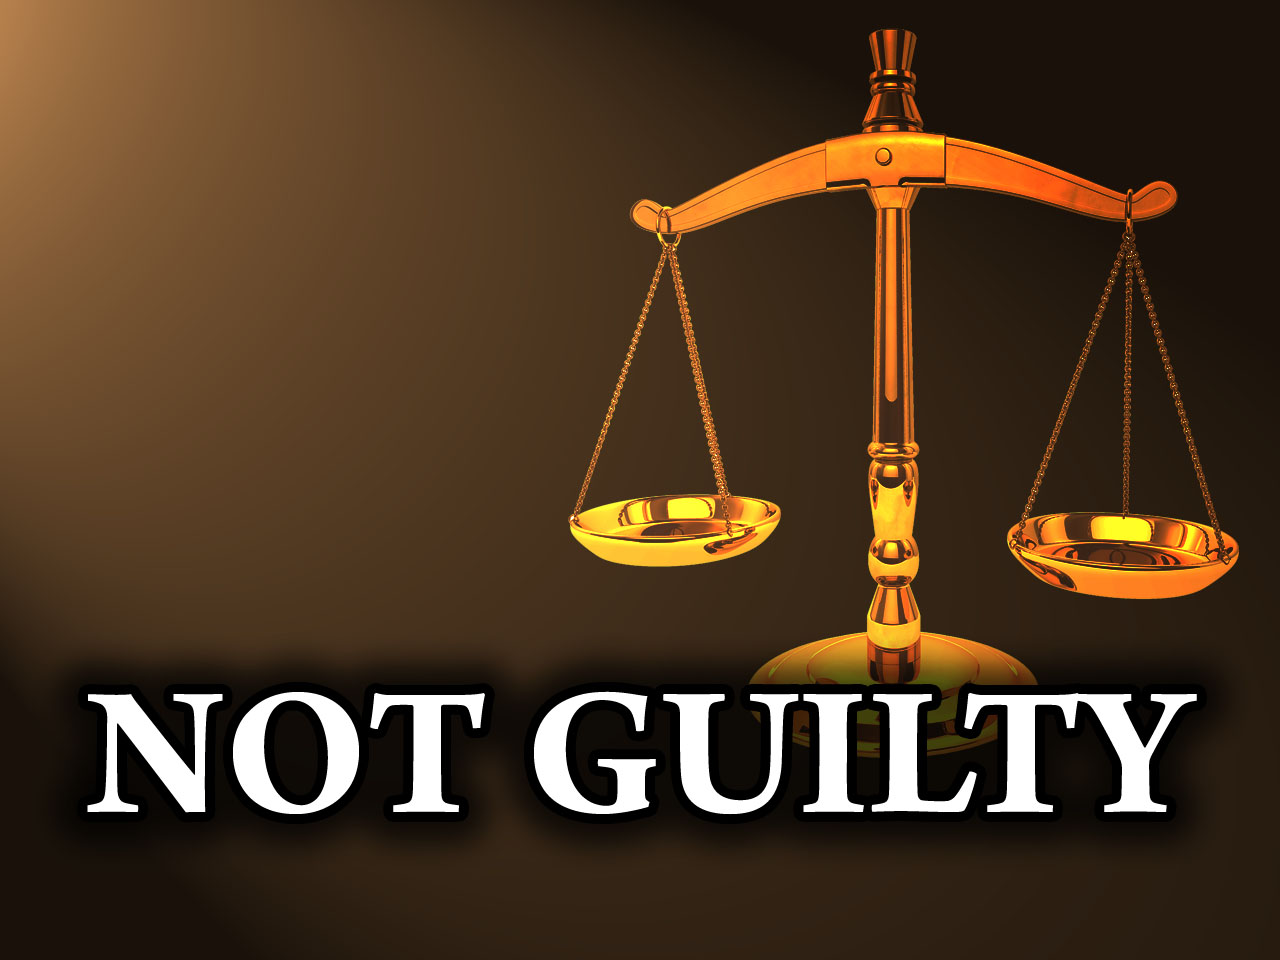 Not Guilty Former Hc Probate Judge Cleared On All Charges 92 1 Wlhr